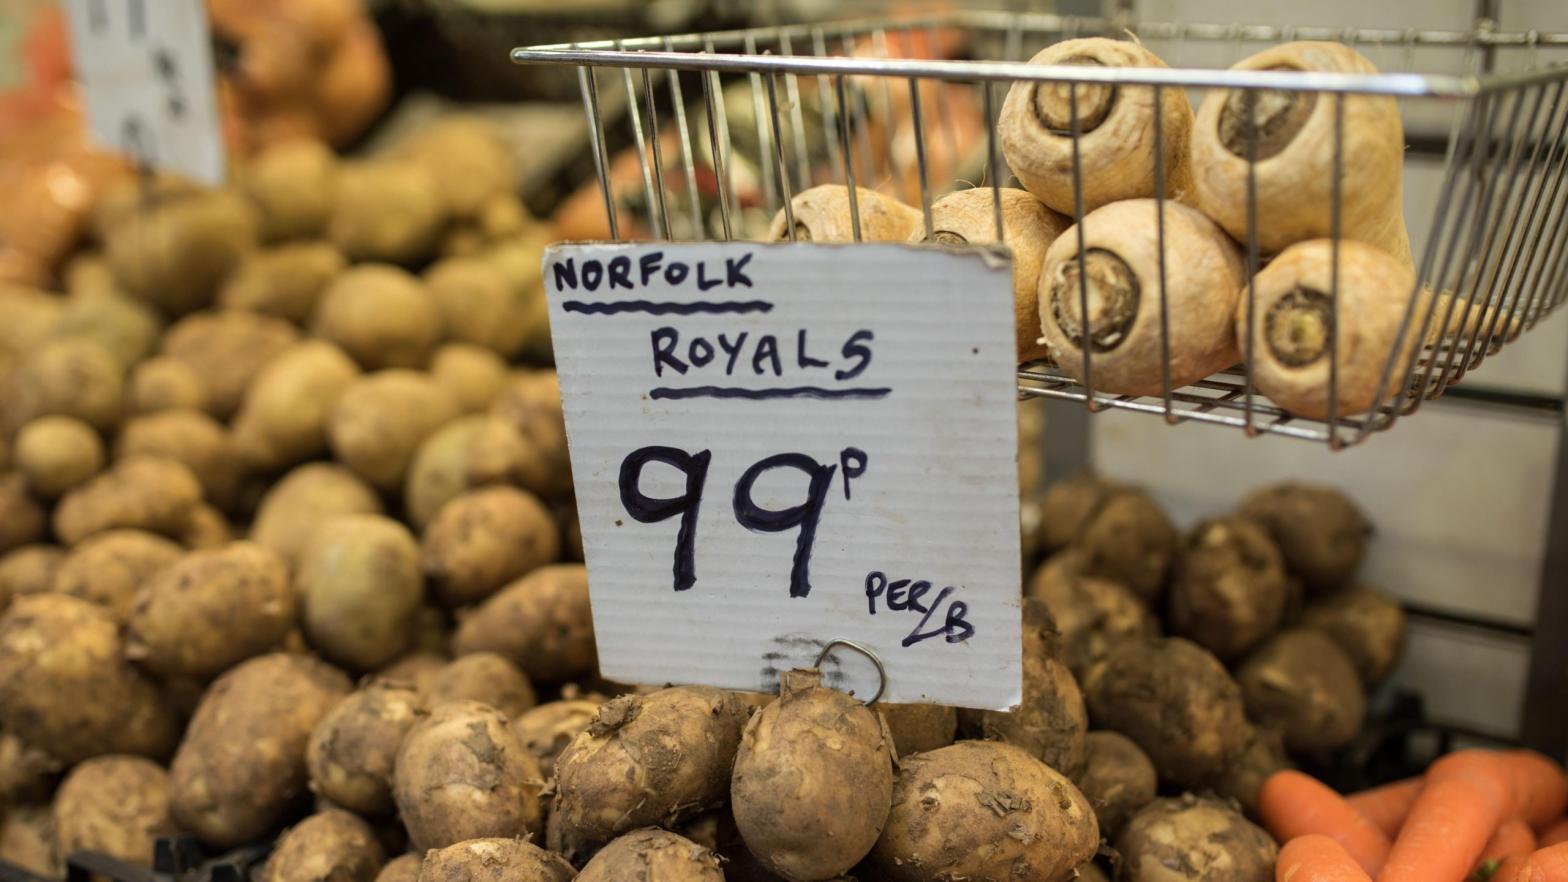 Potatoes are displayed for sale in imperial measurements in Darlington England on September 6, 2018.  (Photo: Oli Scarff/AFP, Getty Images)